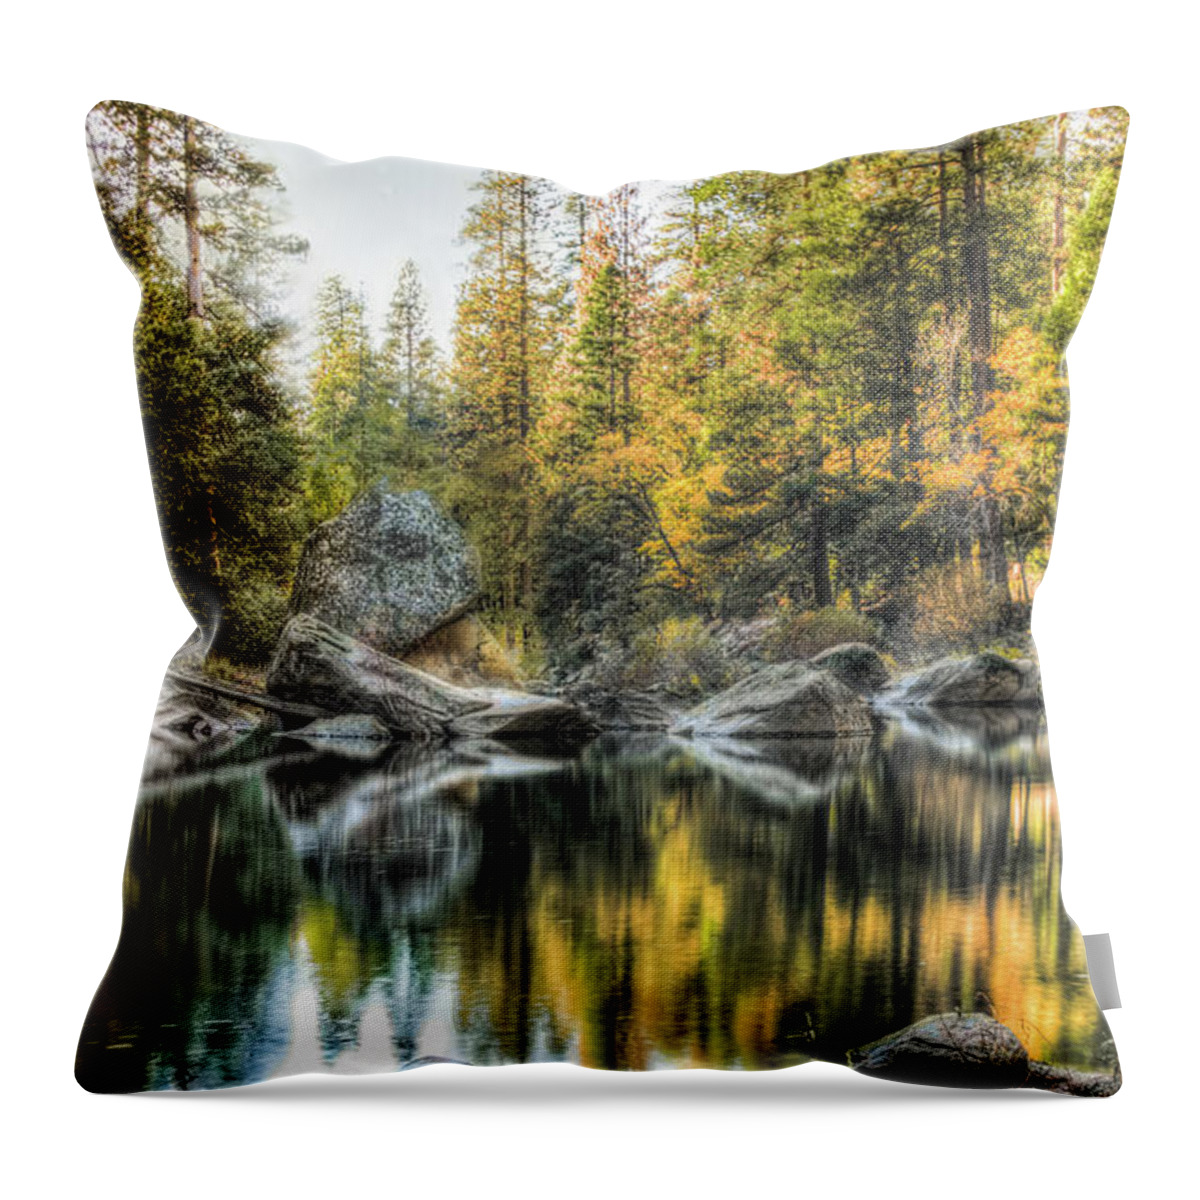 Susaneileenevans Throw Pillow featuring the photograph Tranquility by Susan Eileen Evans